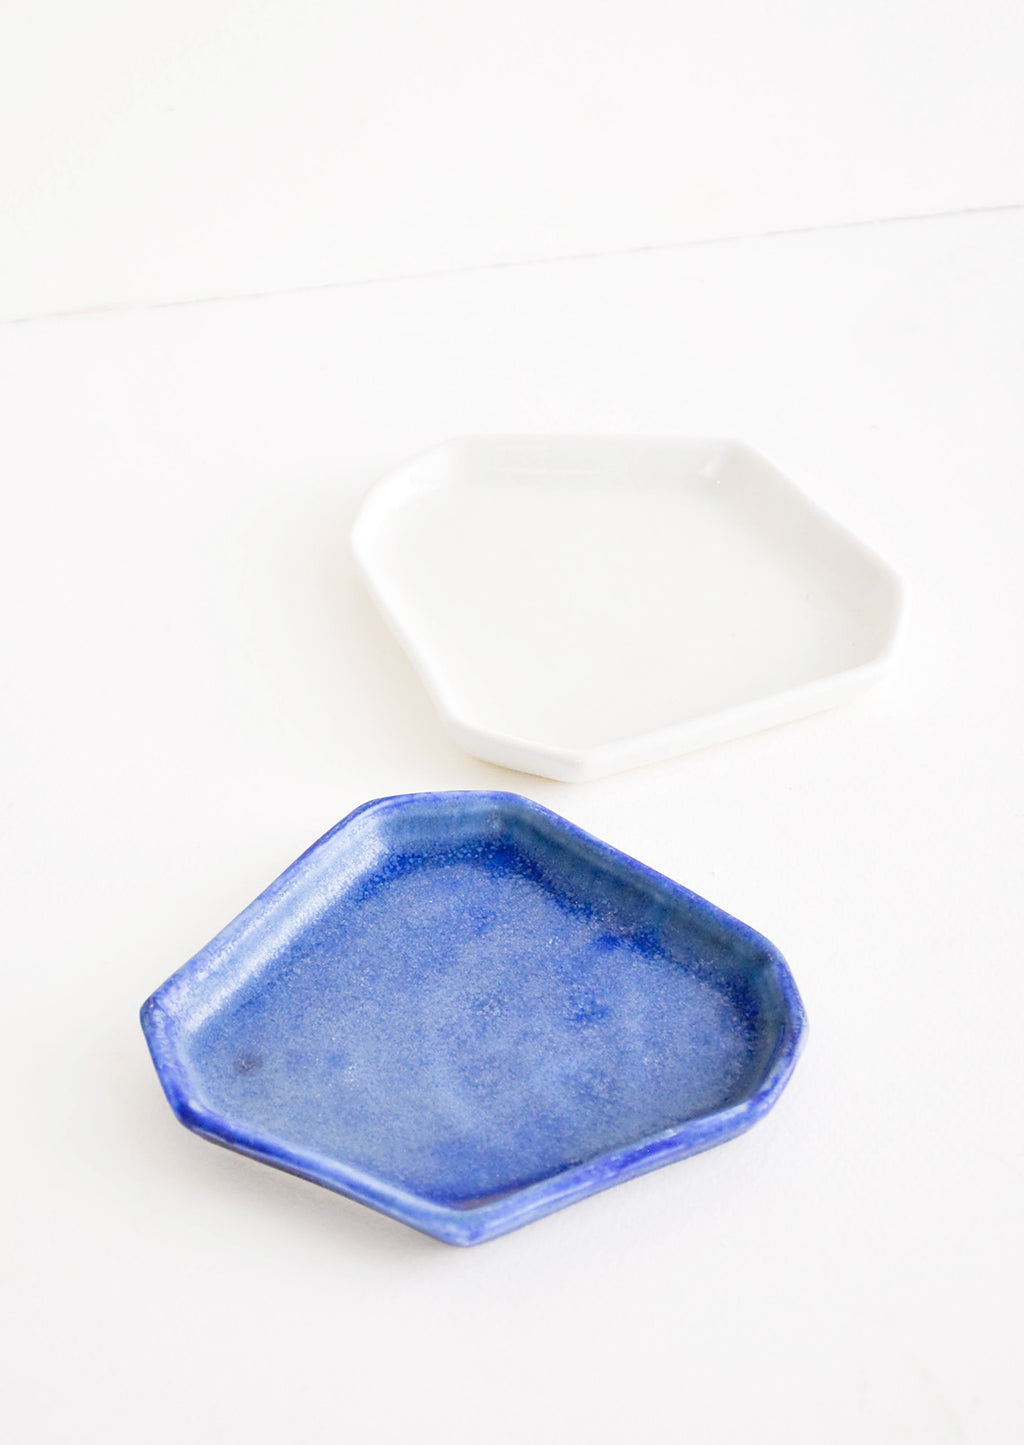 2: Faceted Ceramic Trinket Tray in  - LEIF